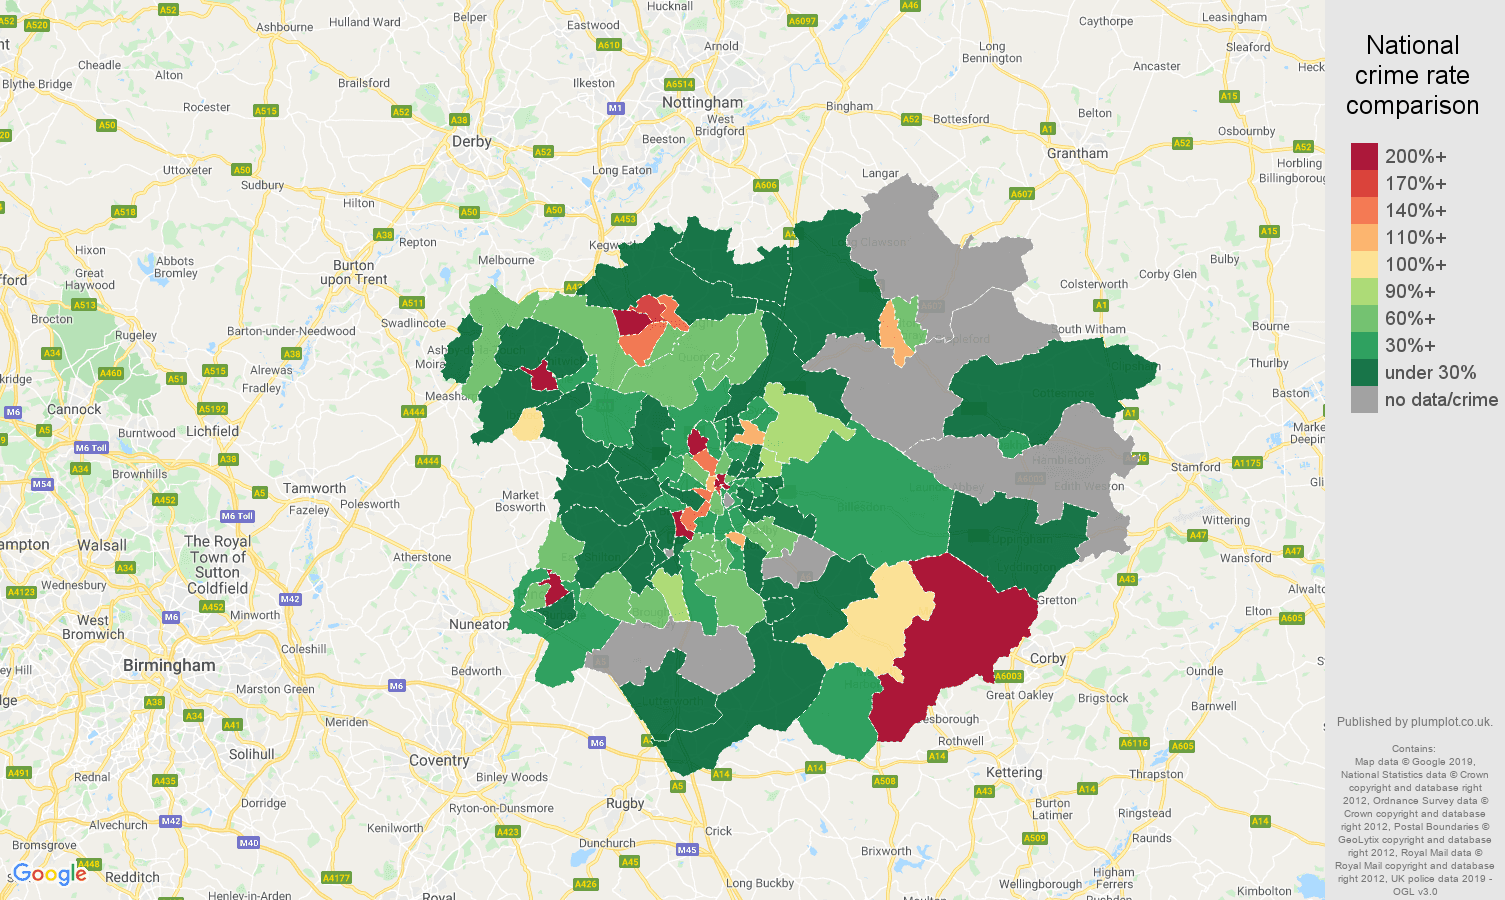 Leicester shoplifting crime rate comparison map